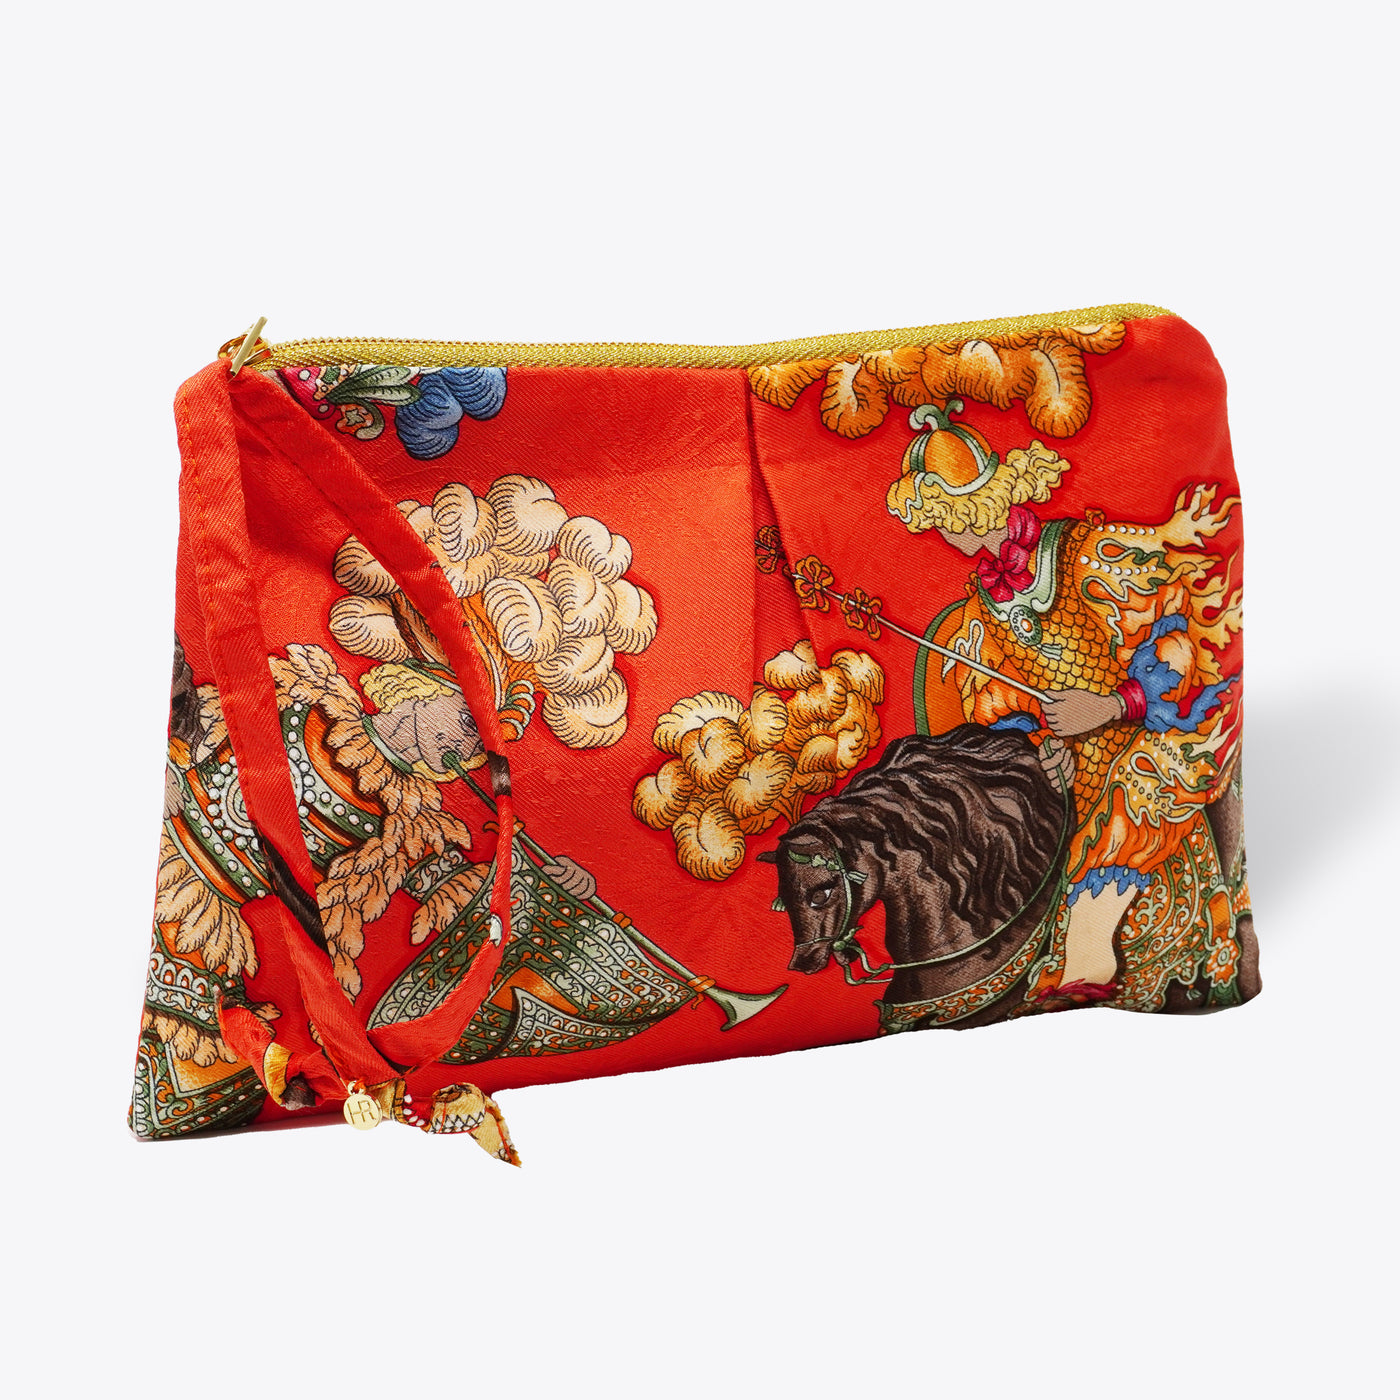 "Les Fetes du Roi Soleil" Scarf Bag (Upcycled from Hermes Scarf) Party Clutch Hampton Road Designs   